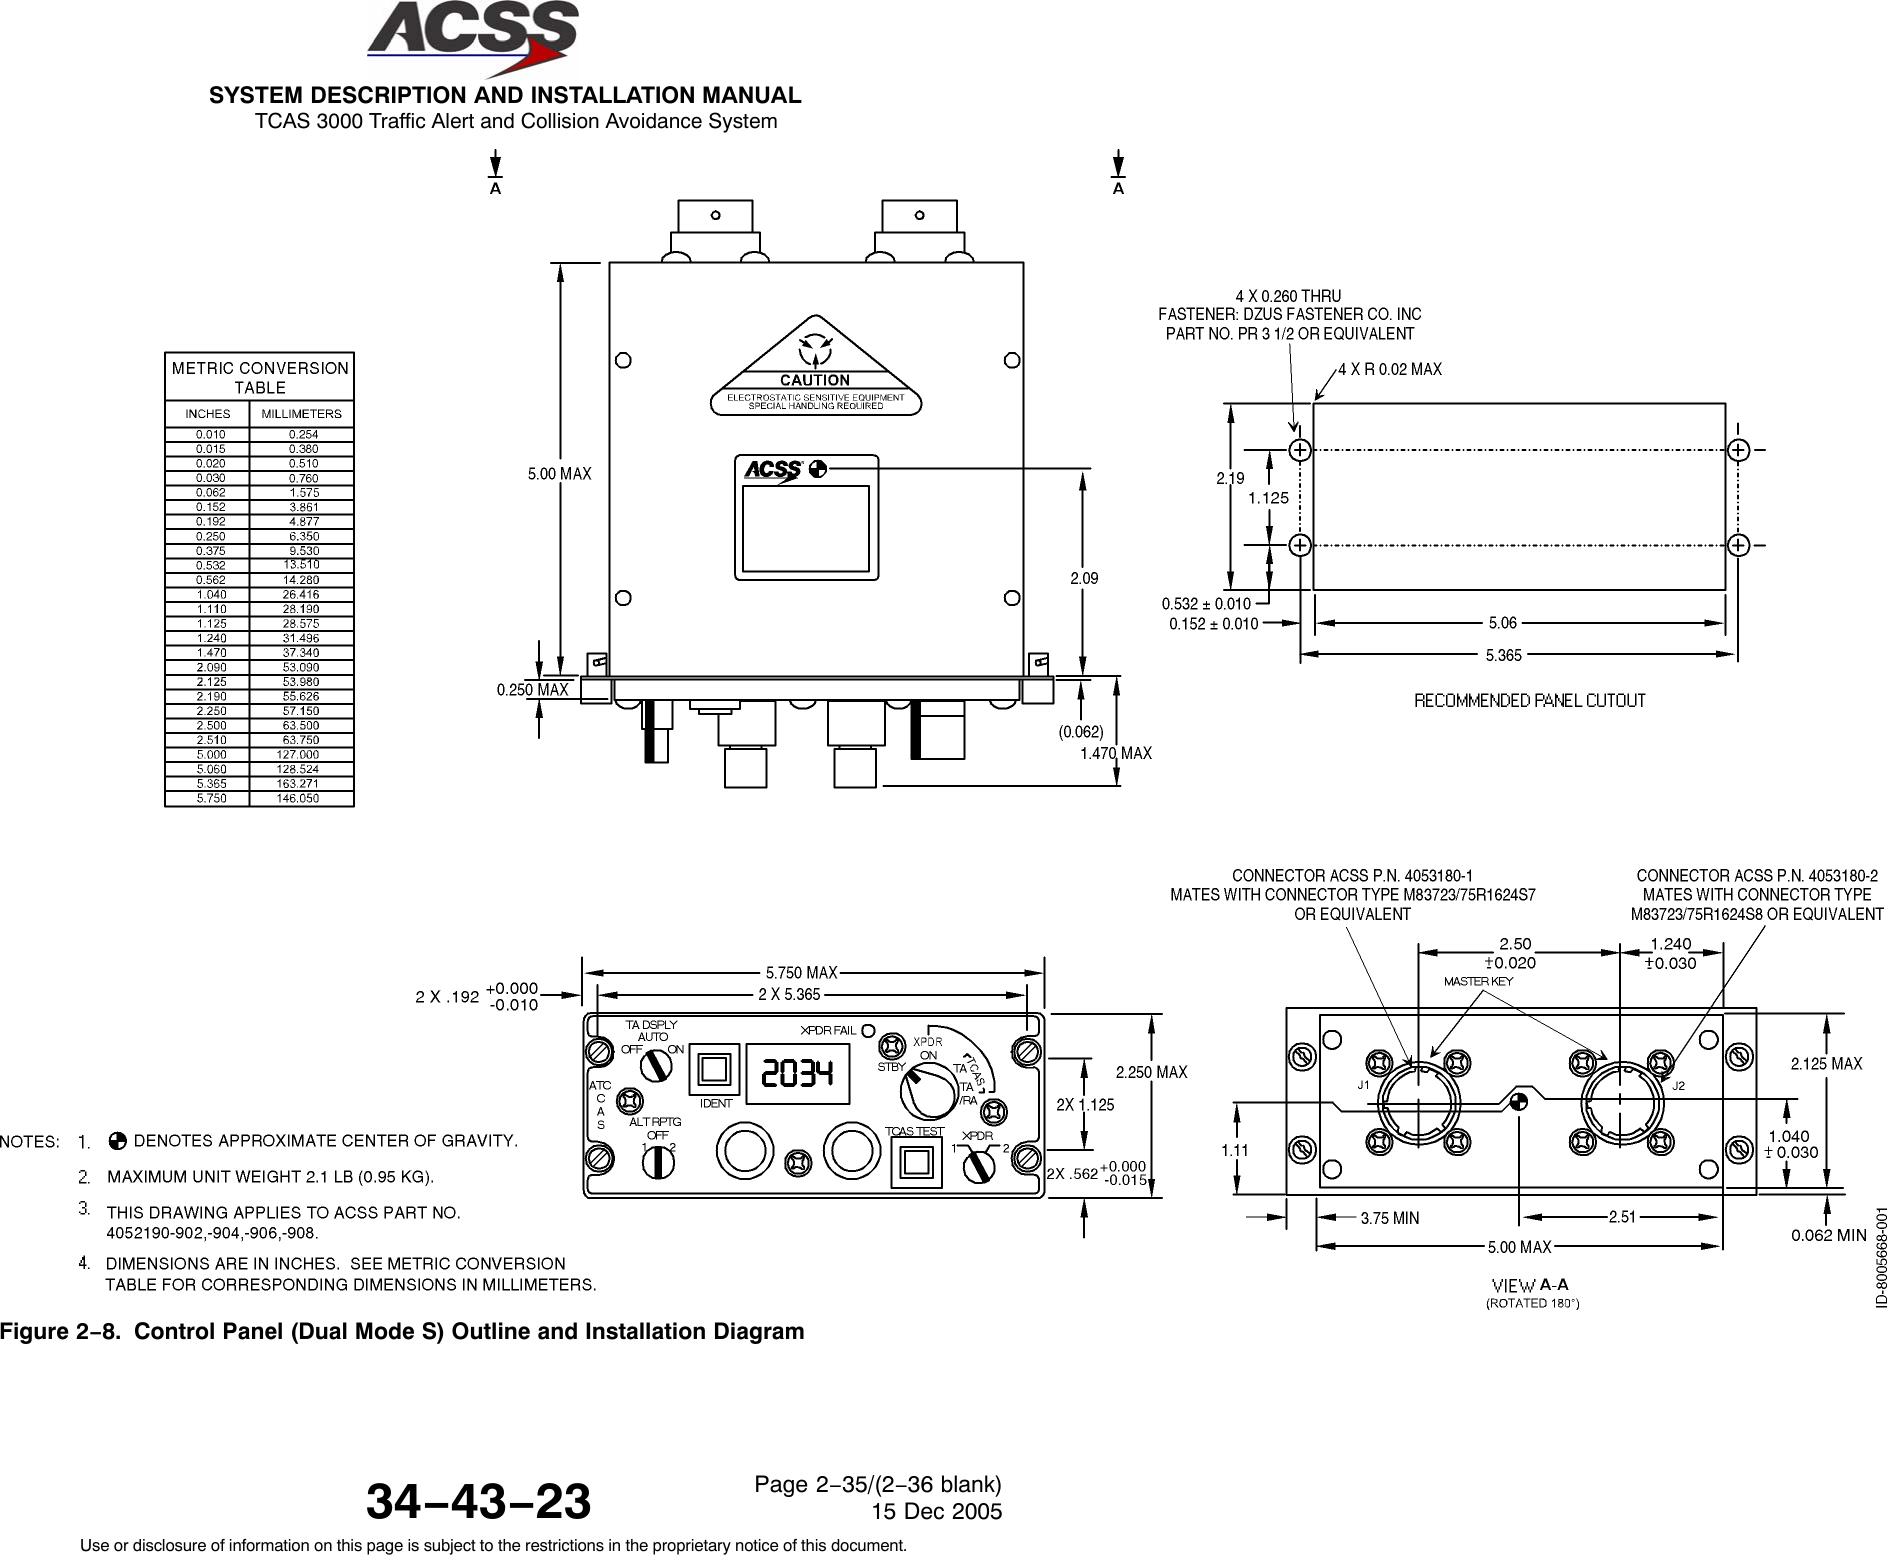 SYSTEM DESCRIPTION AND INSTALLATION MANUAL TCAS 3000 Traffic Alert and Collision Avoidance System34−43−23Use or disclosure of information on this page is subject to the restrictions in the proprietary notice of this document.Page 2−35/(2−36 blank)15 Dec 2005Figure 2−8. Control Panel (Dual Mode S) Outline and Installation Diagram